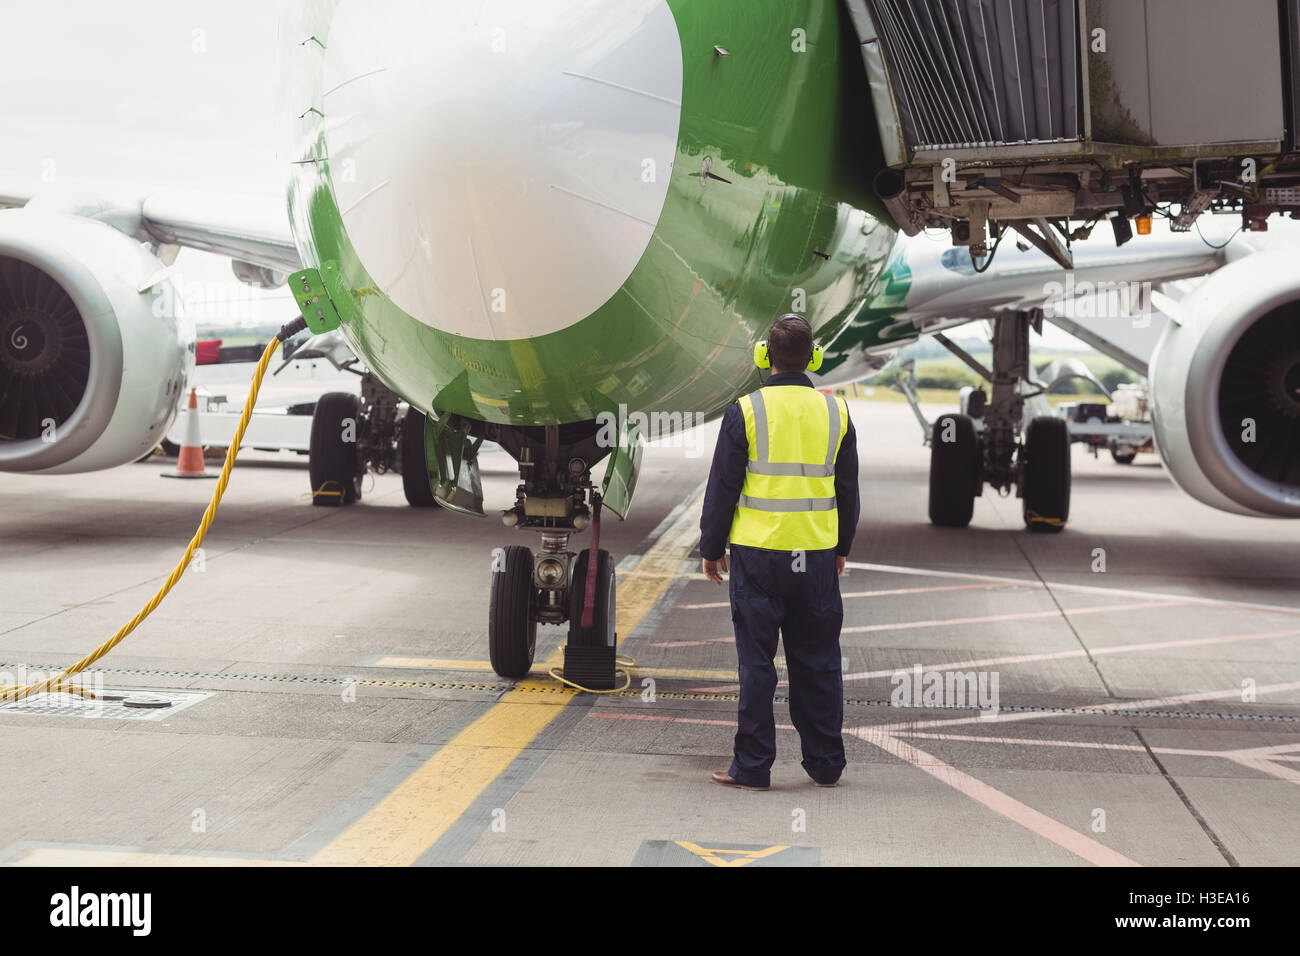 Rear view of airport ground crew worker directing airplane Stock Photo